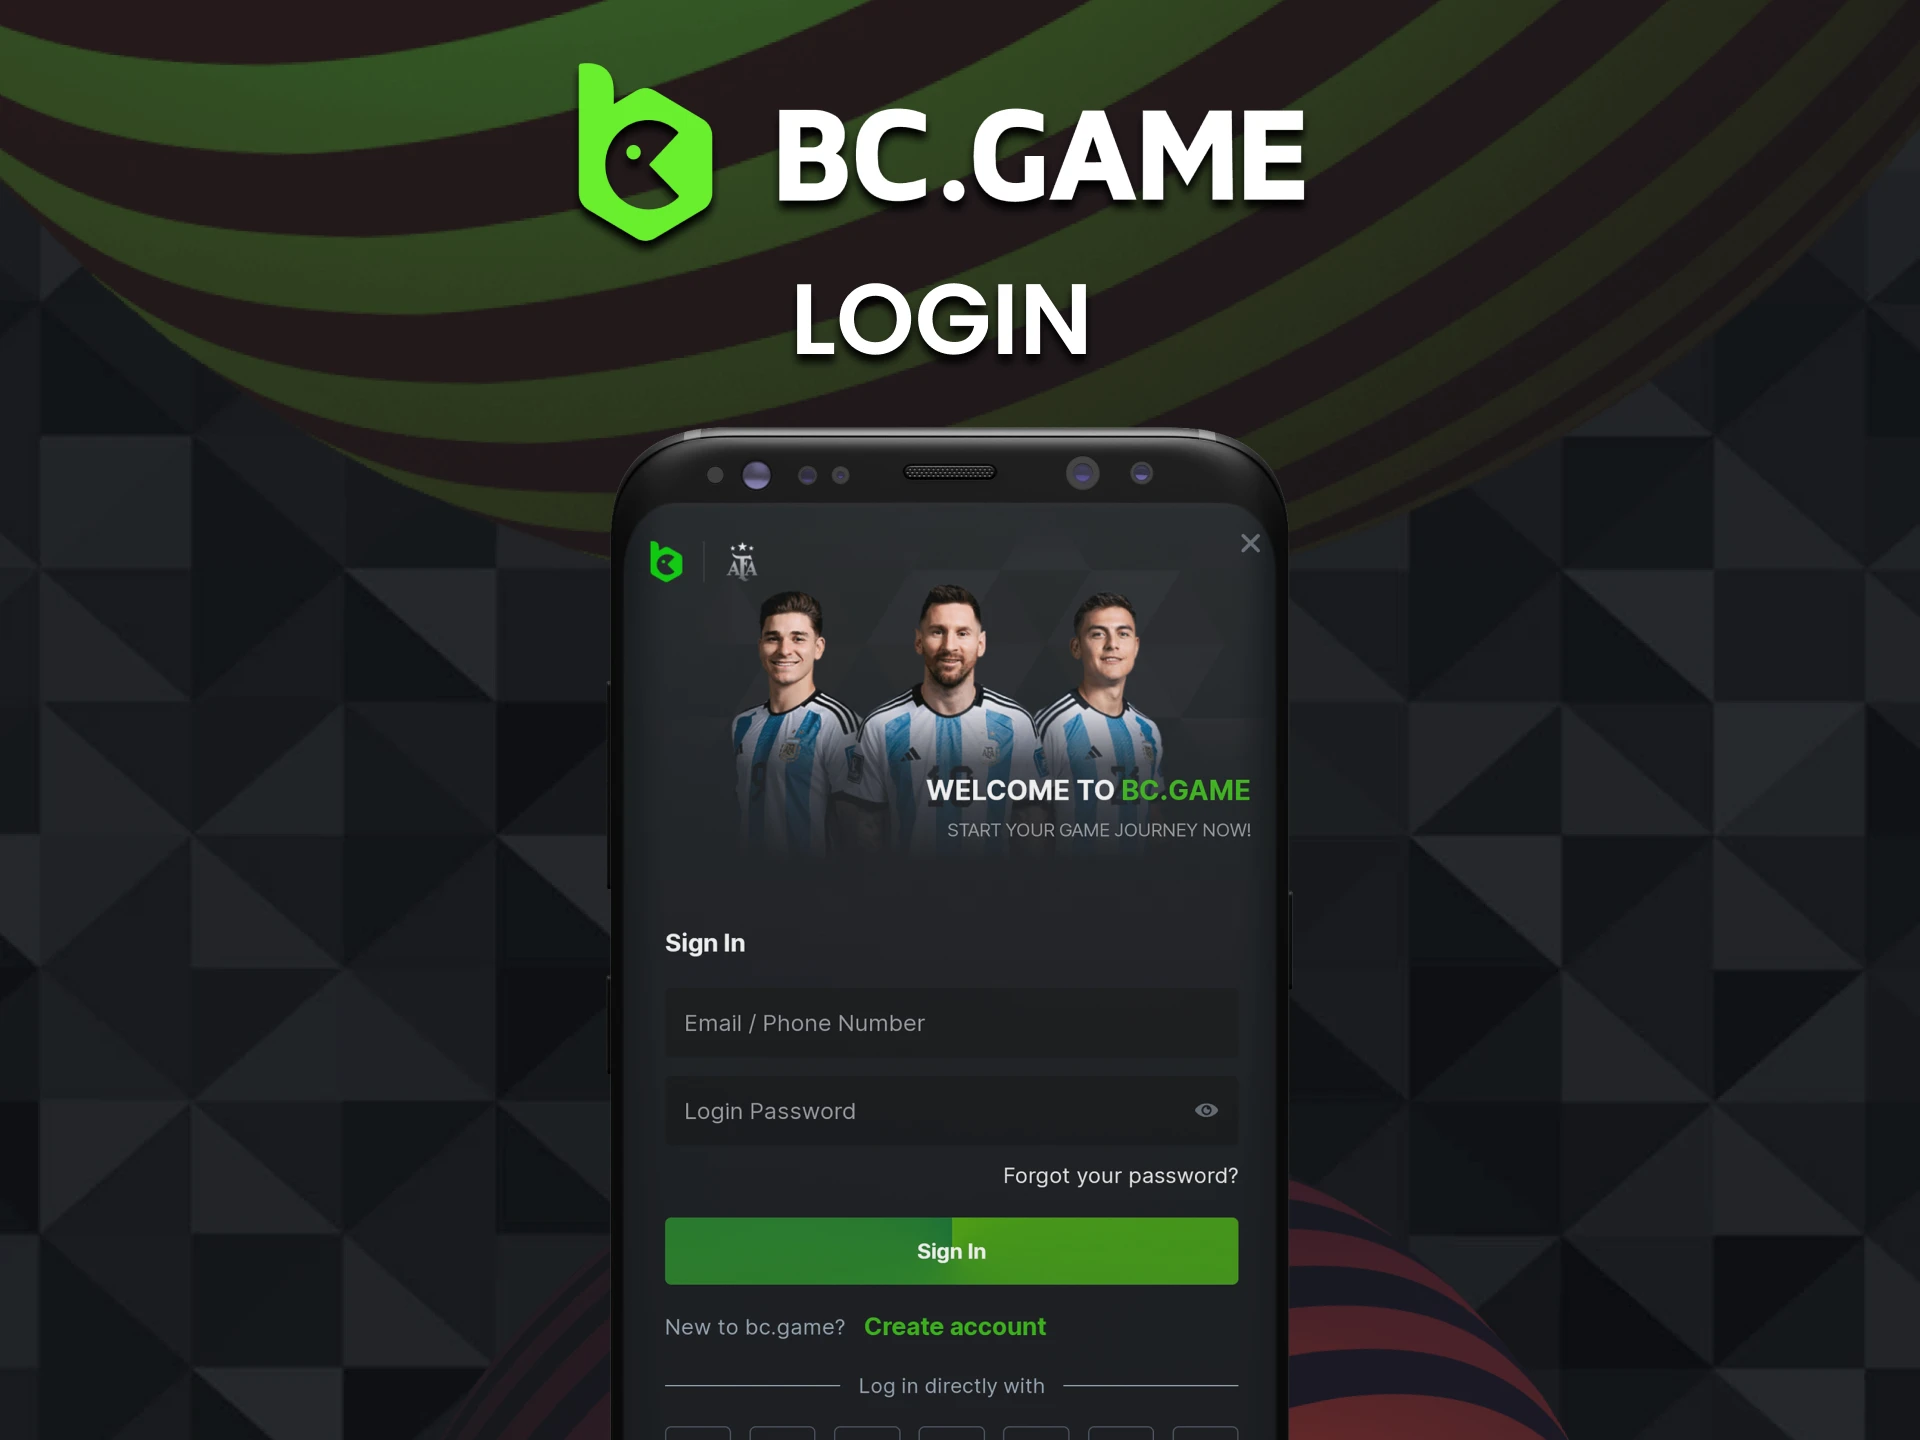 Log in to your personal account through the BC Game mobile app.